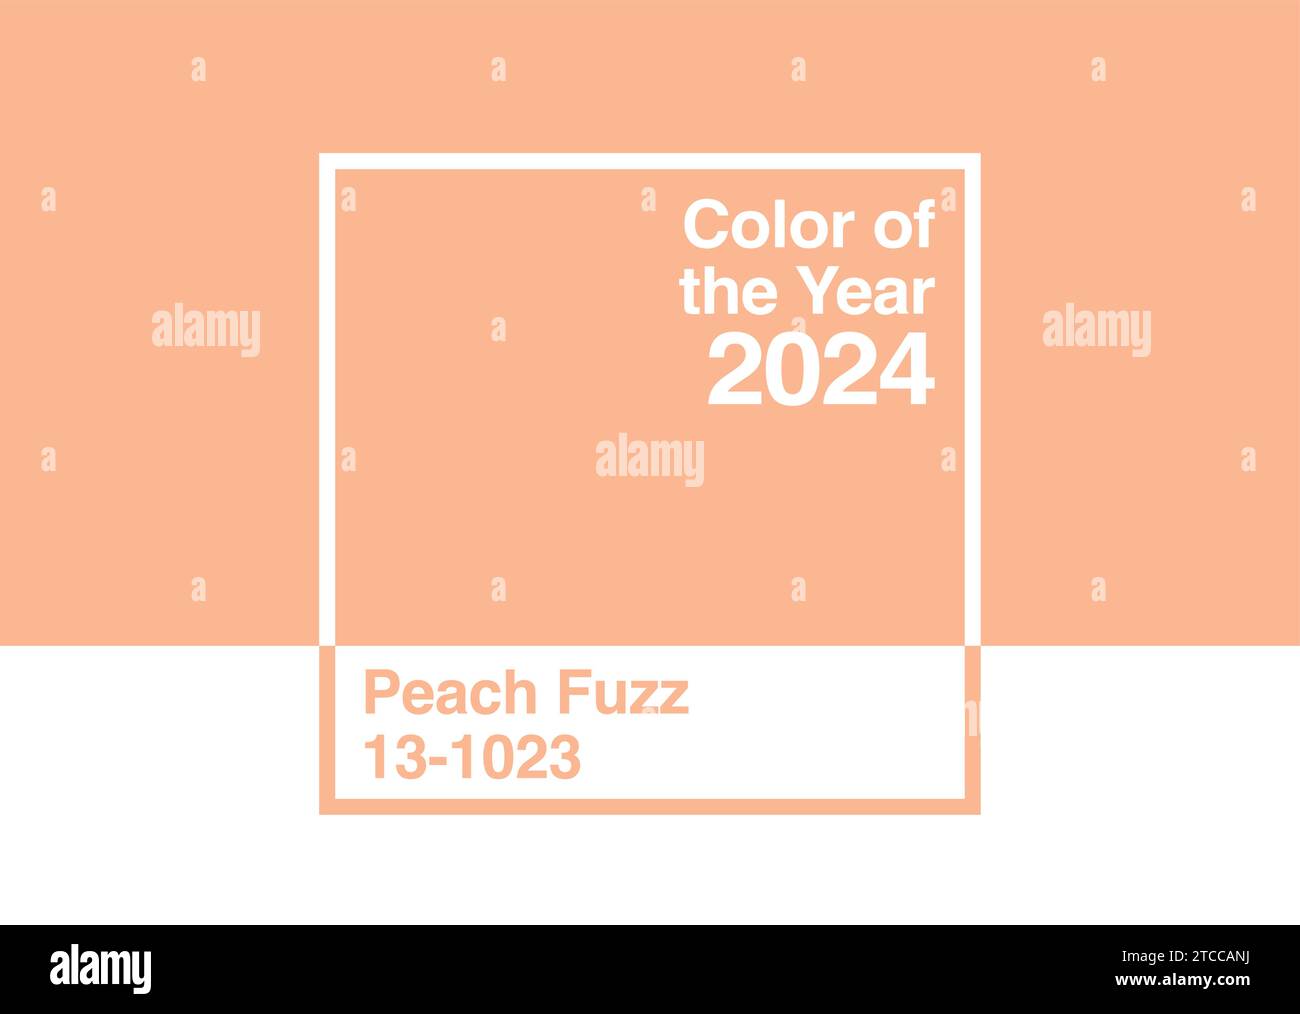 Antalya, Turkey - December 11, 2023: 2024 Color of the Year, Pantone 13-1023 Peach Fuzz trend color palette sample swatch book guide Stock Vector